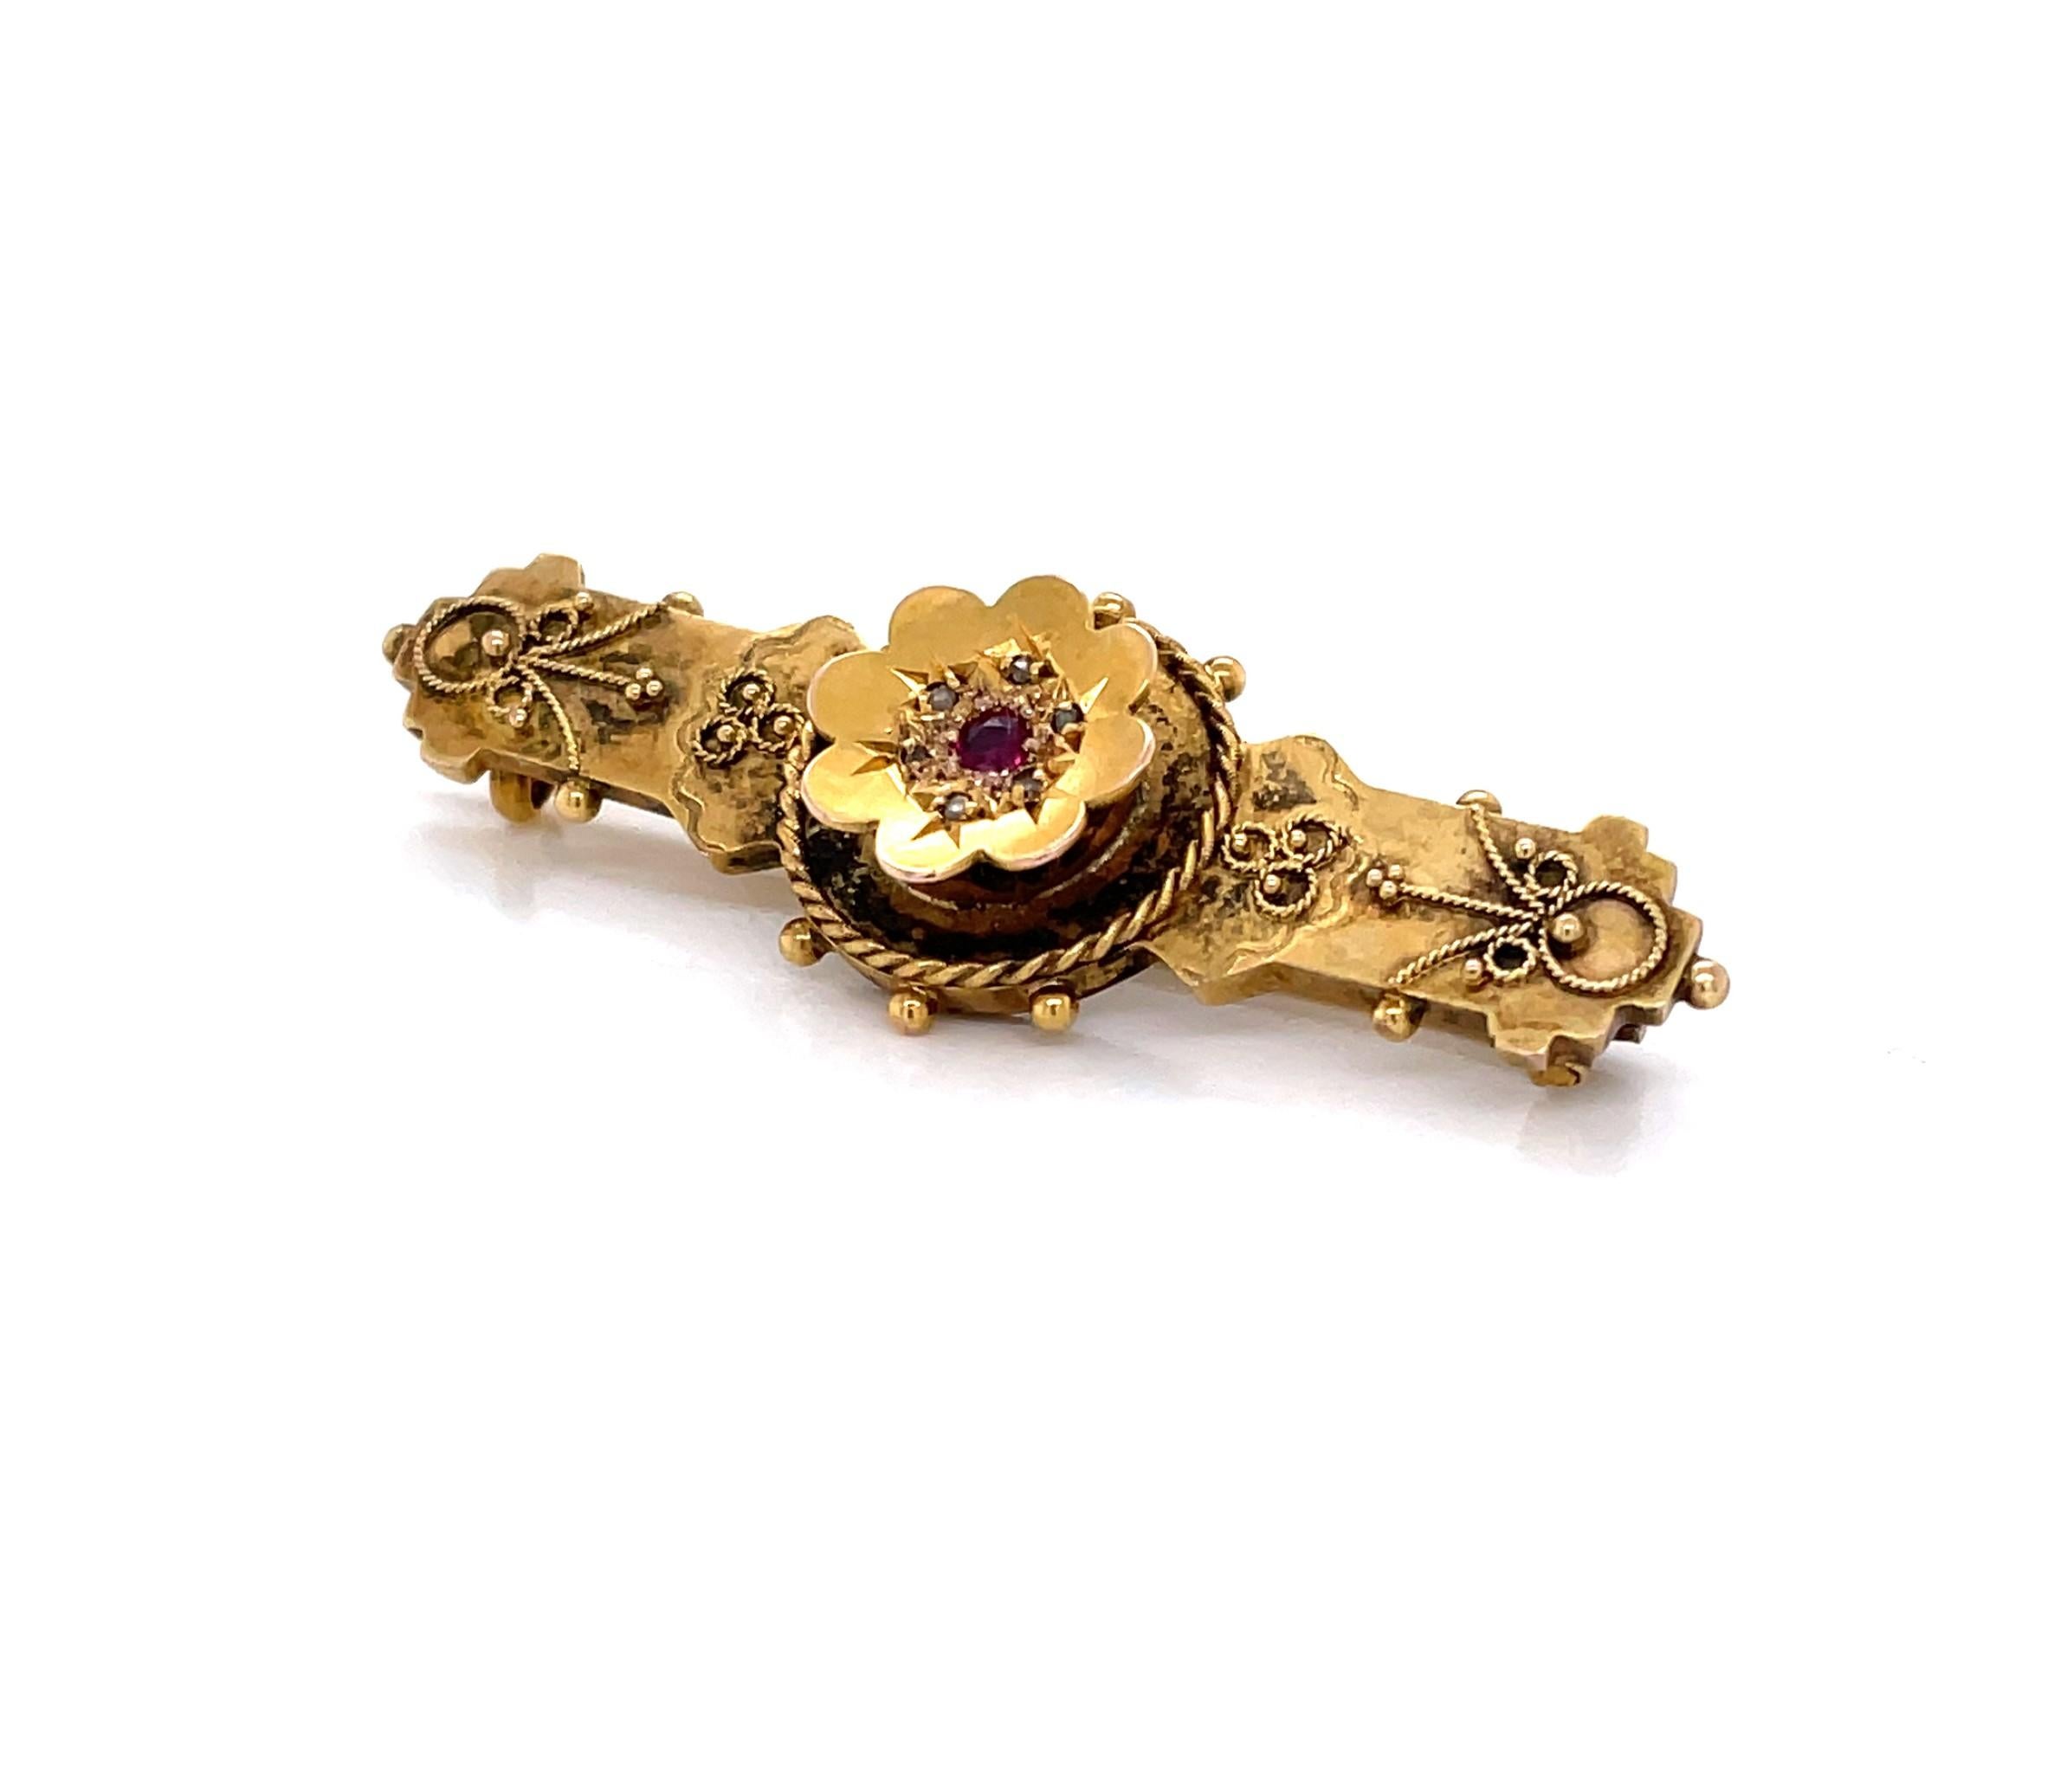 Romantic antique accent piece, this petite Edwardian Gold Bar Pin has charming characteristics of the period. Of nine karat yellow gold with an antique patina, the pin measures 1-3/4 inches and is decorated with fine gold thread appliques with a